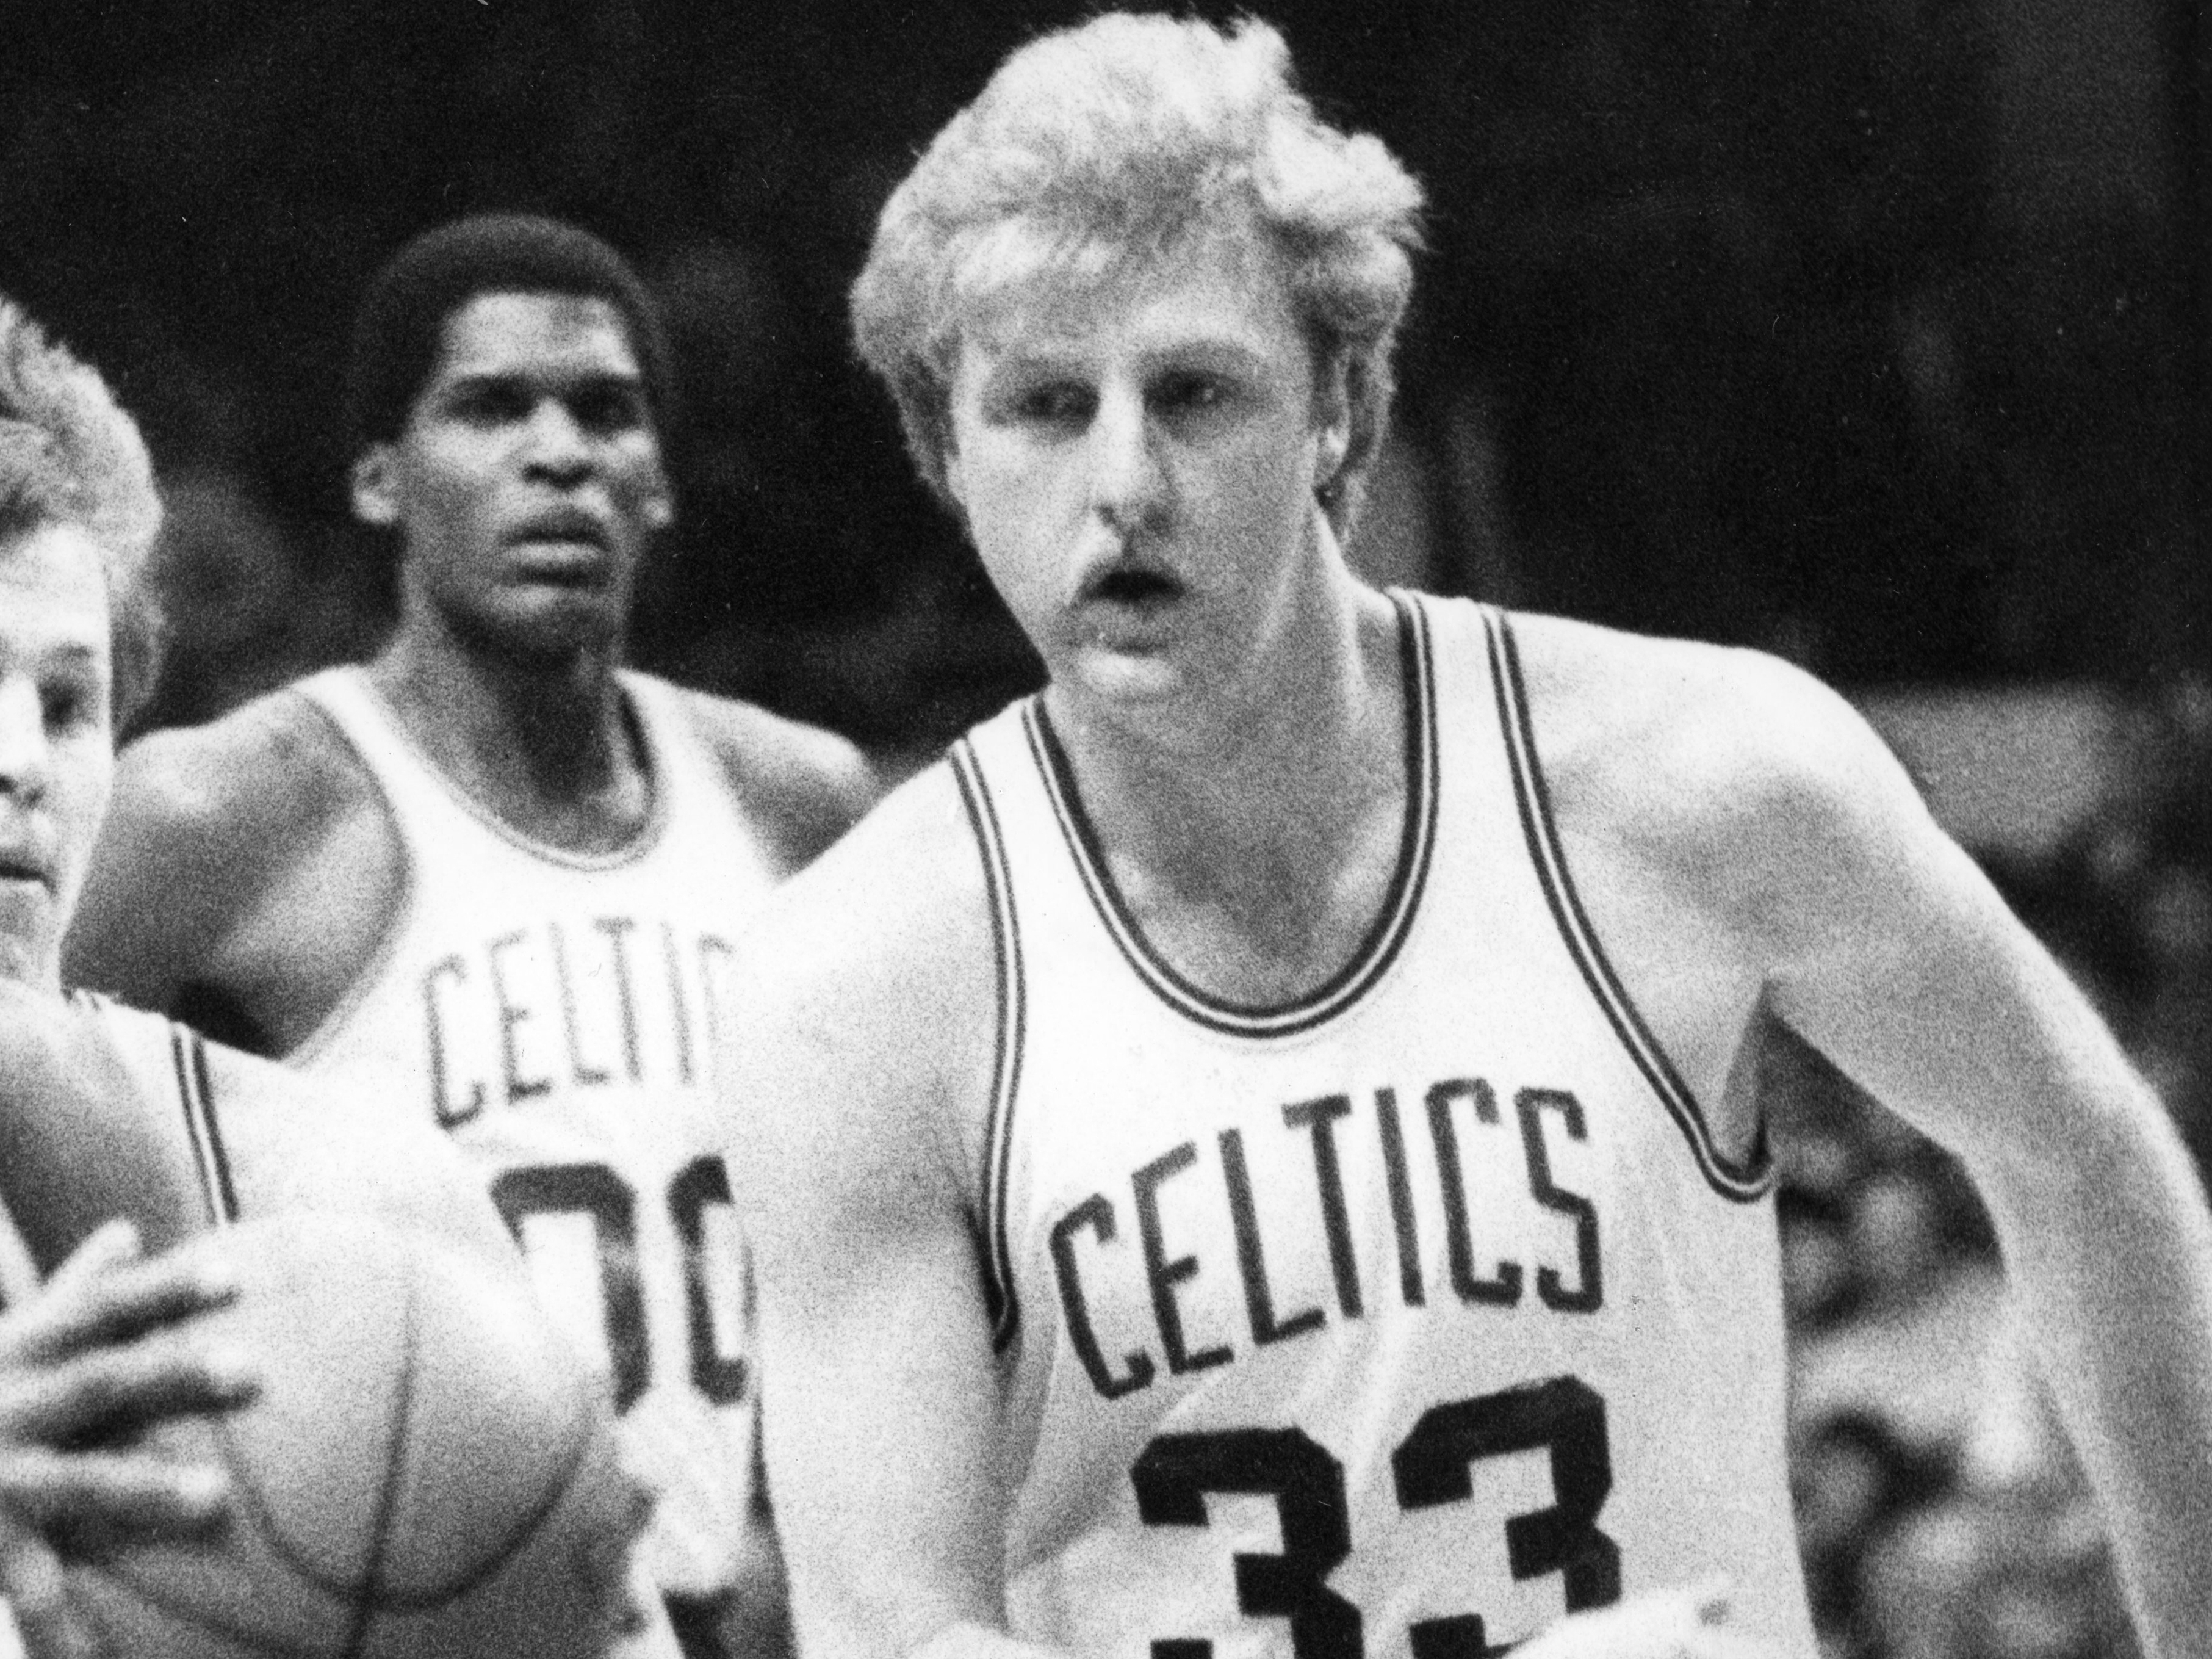 That was the ultimate for me - Larry Bird revealed the greatest